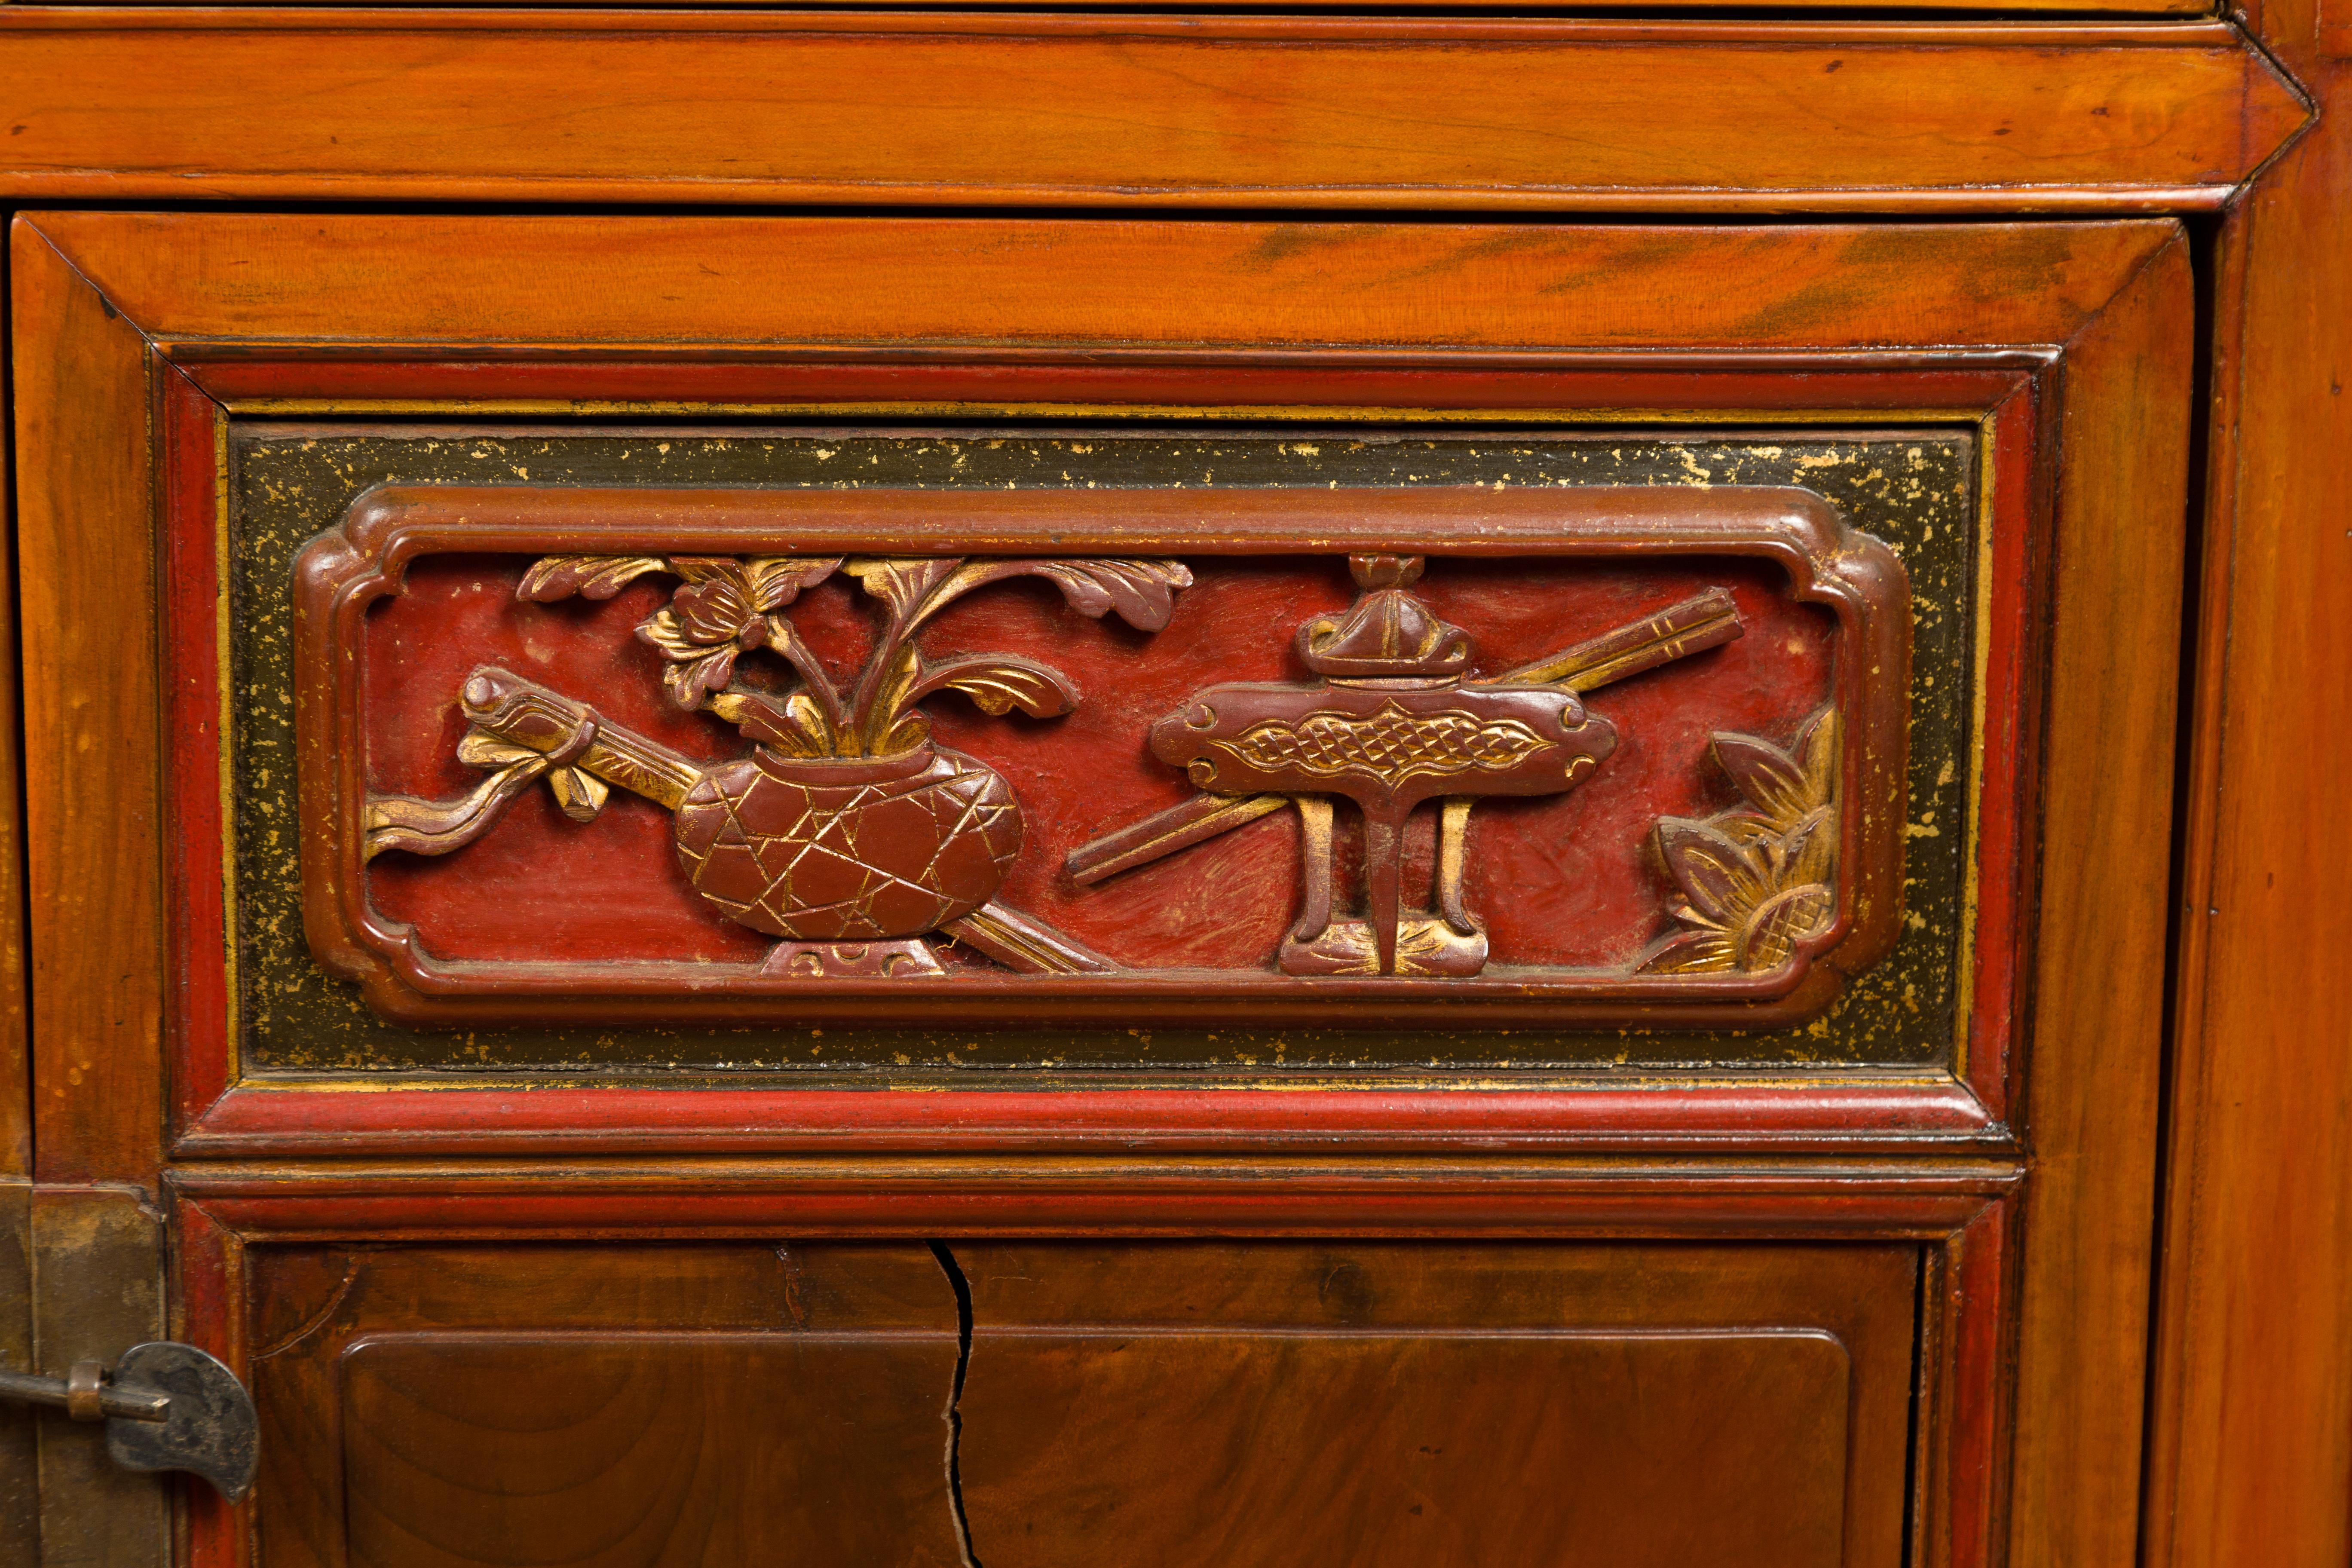 19th Century Chinese Ming Dynasty Style Cabinet with Doors, Drawers and Gilt Carved Motifs